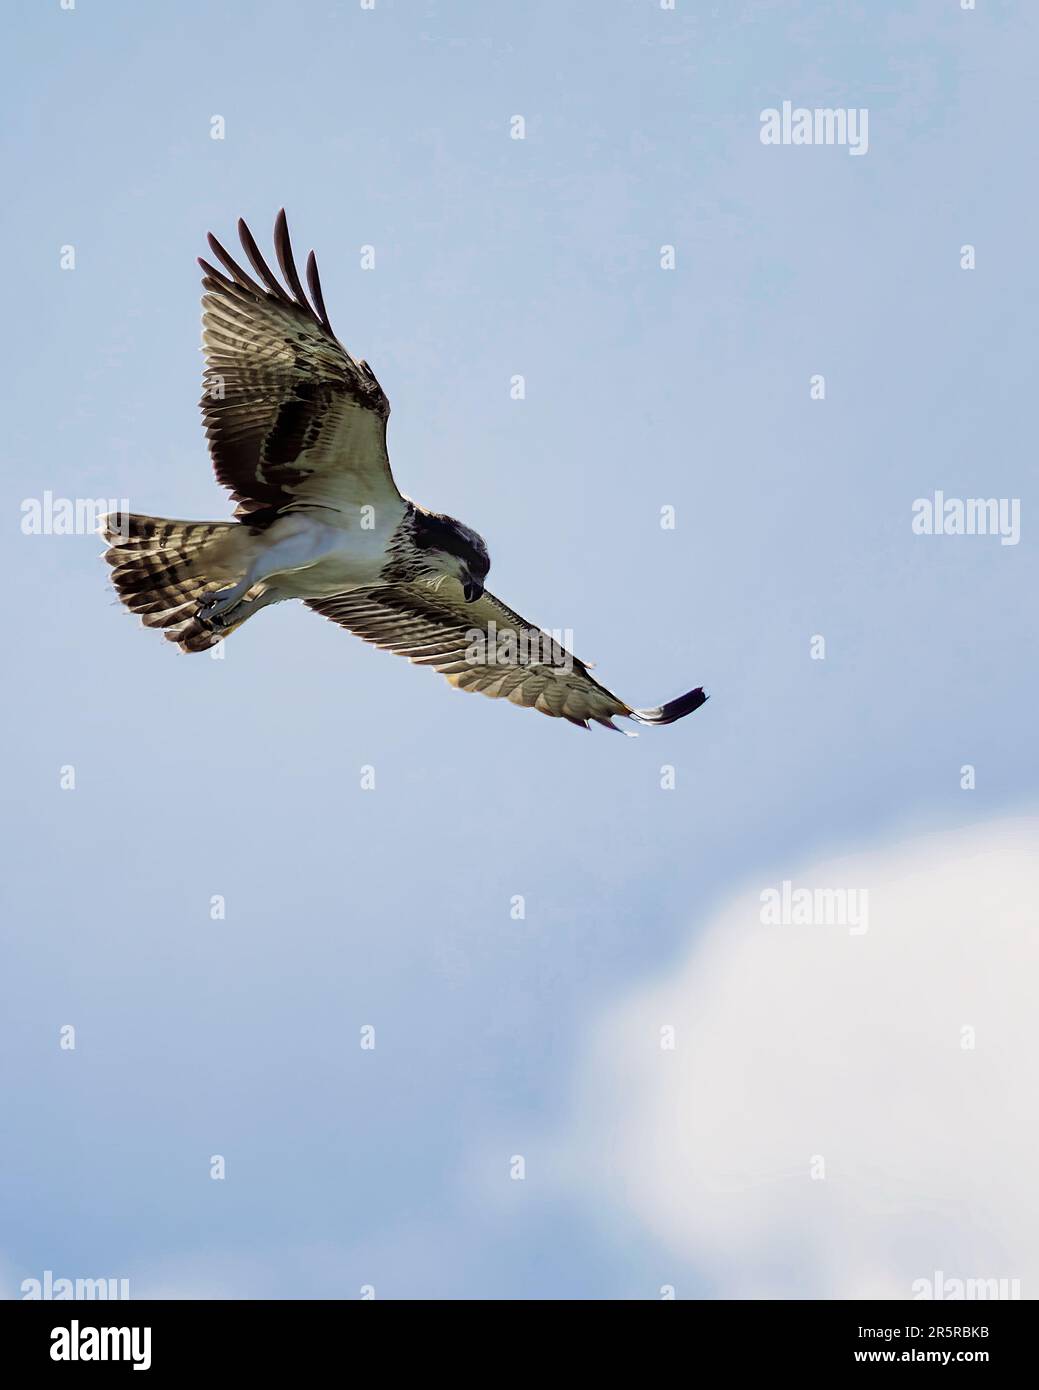 A graceful osprey soars through the sky, catching thermals as it surveys the landscape below Stock Photo